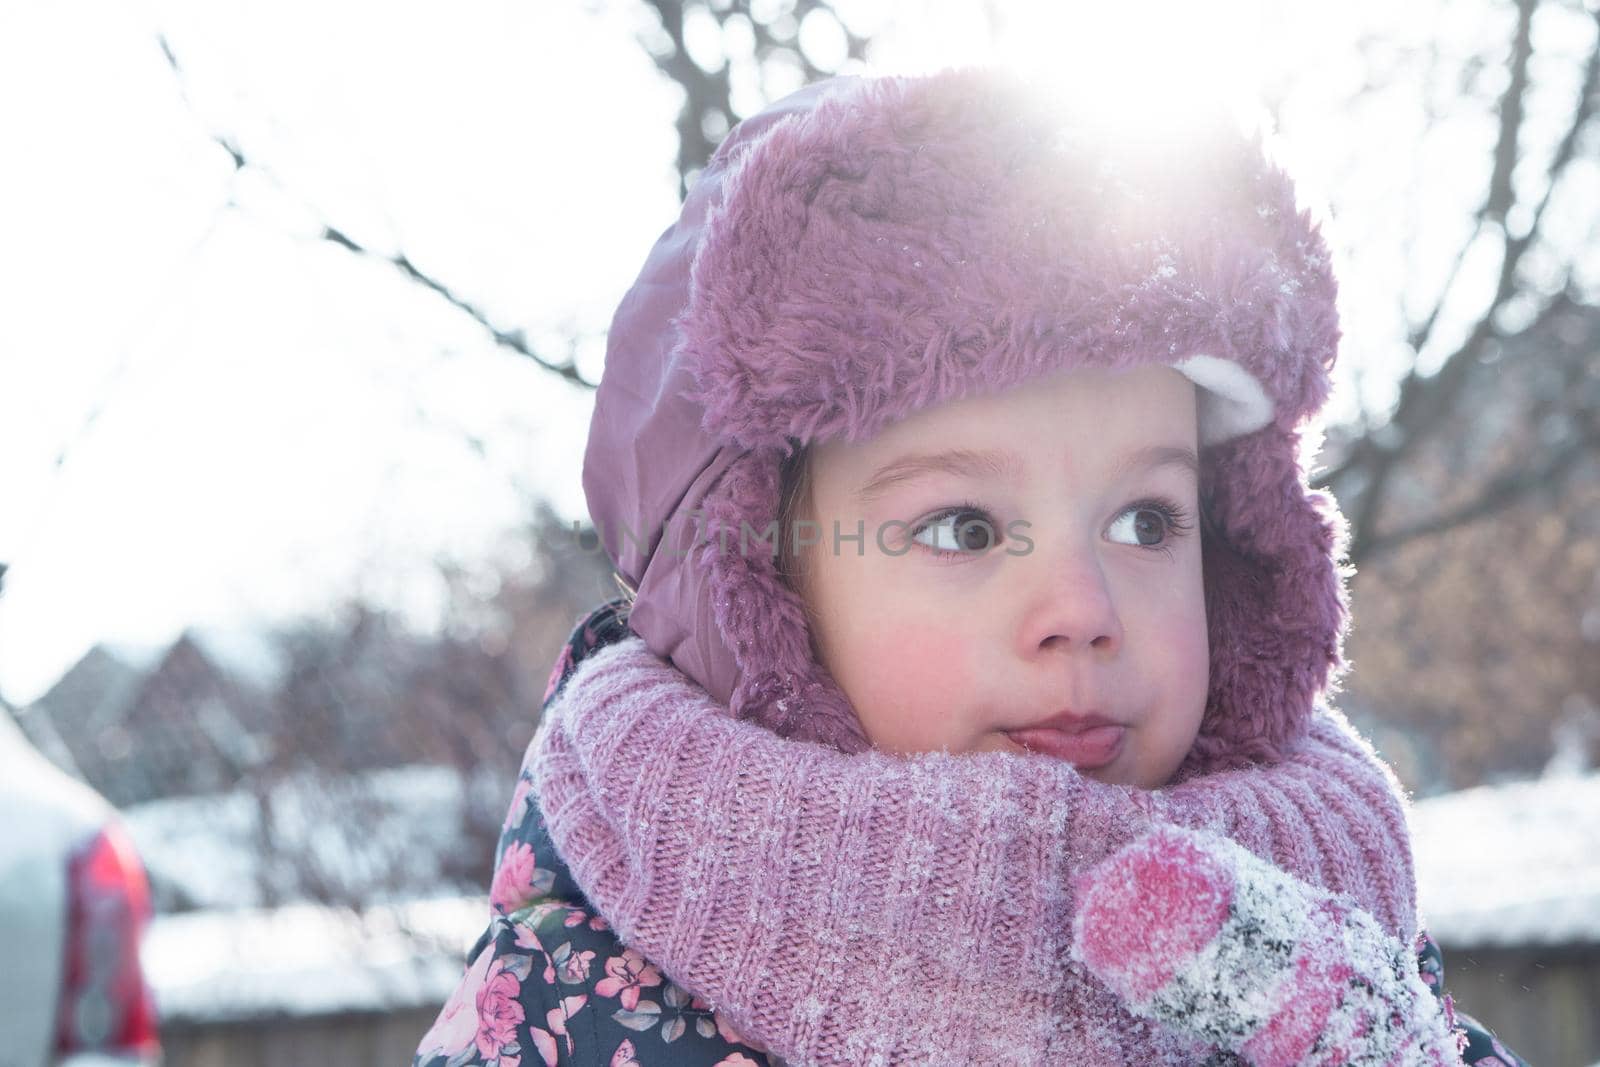 Winter, games, family, childhood concepts - close-up portrait authentic little preschool minor 3-4 years girl in pink hat look at camera posing smiles in snowy frosty weather. Funny kid eat taste snow by mytrykau